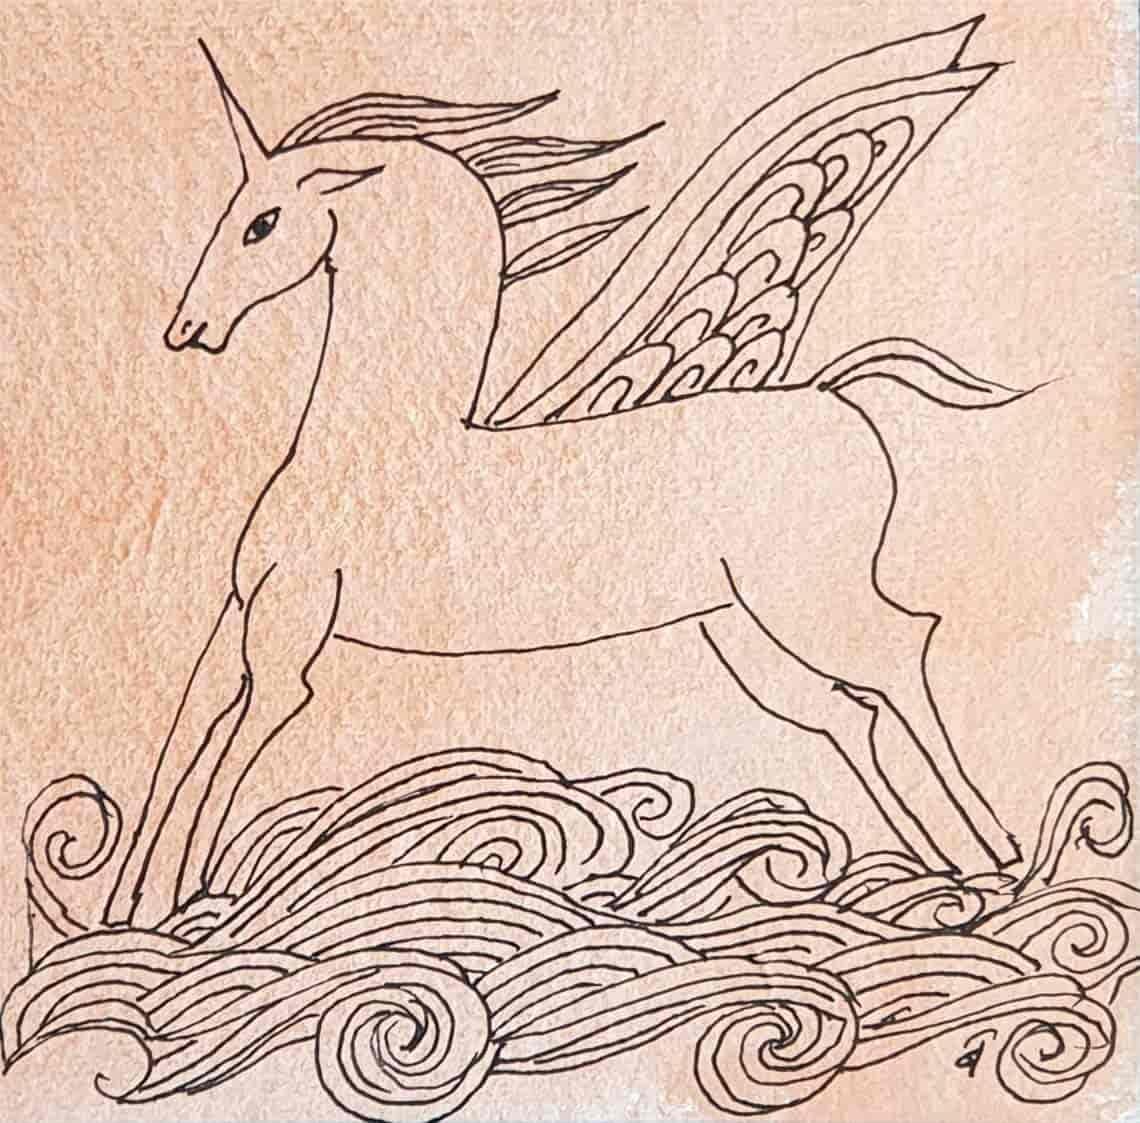 Badri Narayan Animal Painting - The Winged Unicorn, Horse, Pen Drawing, Watercolor on paper, Pink "In Stock"